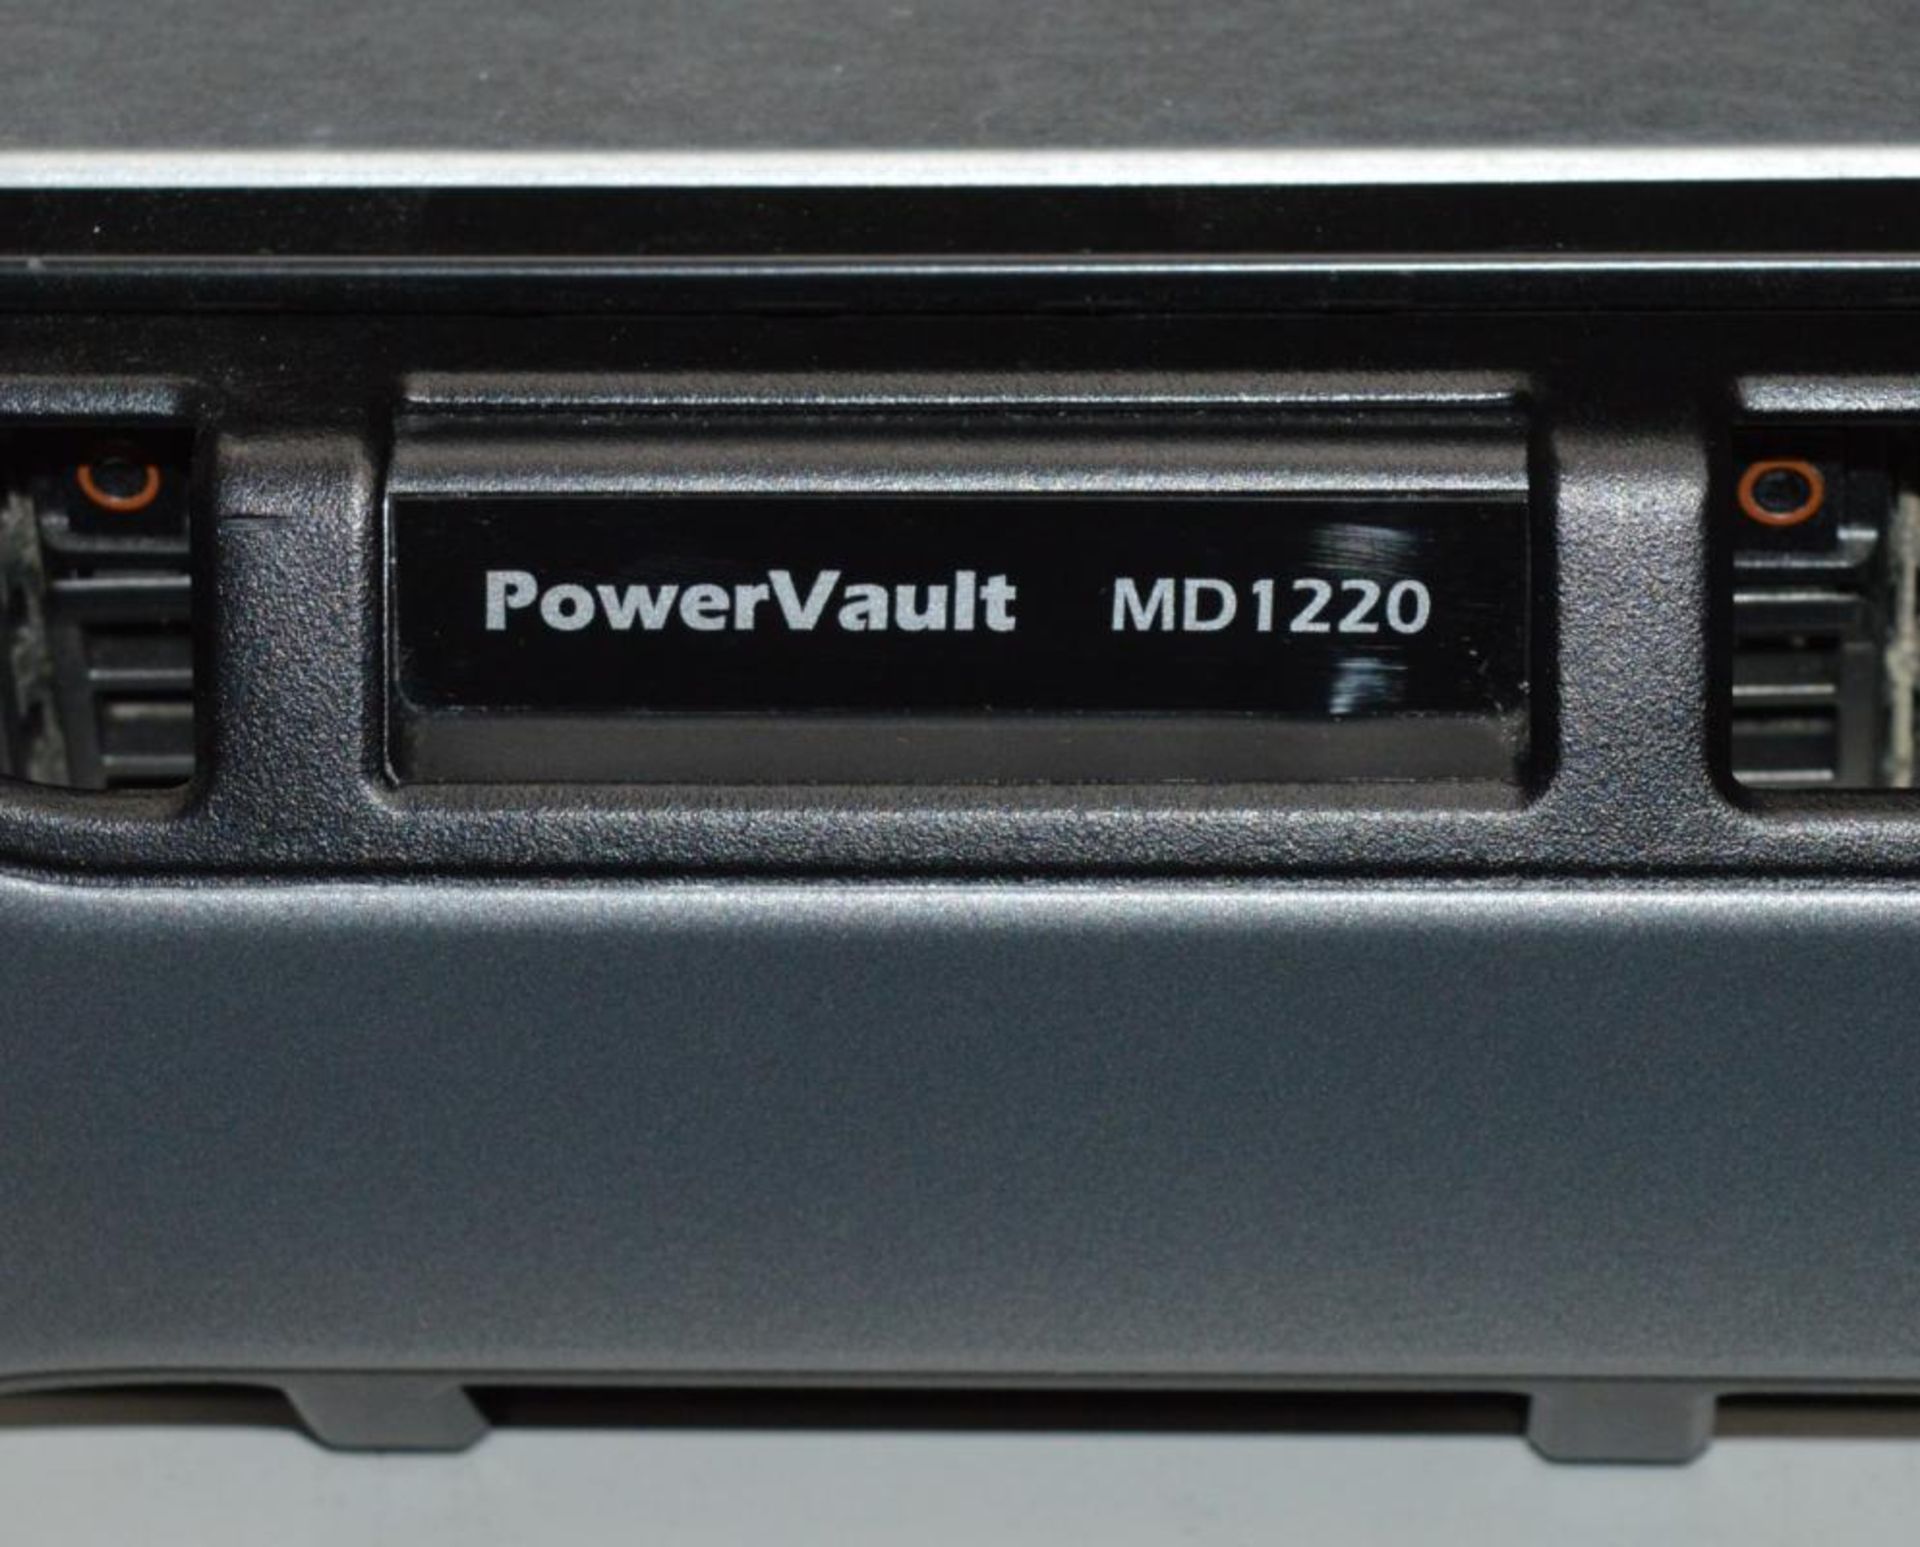 1 x Dell PowerVault MD1220 With Daul 600w PSU's and 2 x MD12 6Gb SAS Controllers - Image 2 of 8